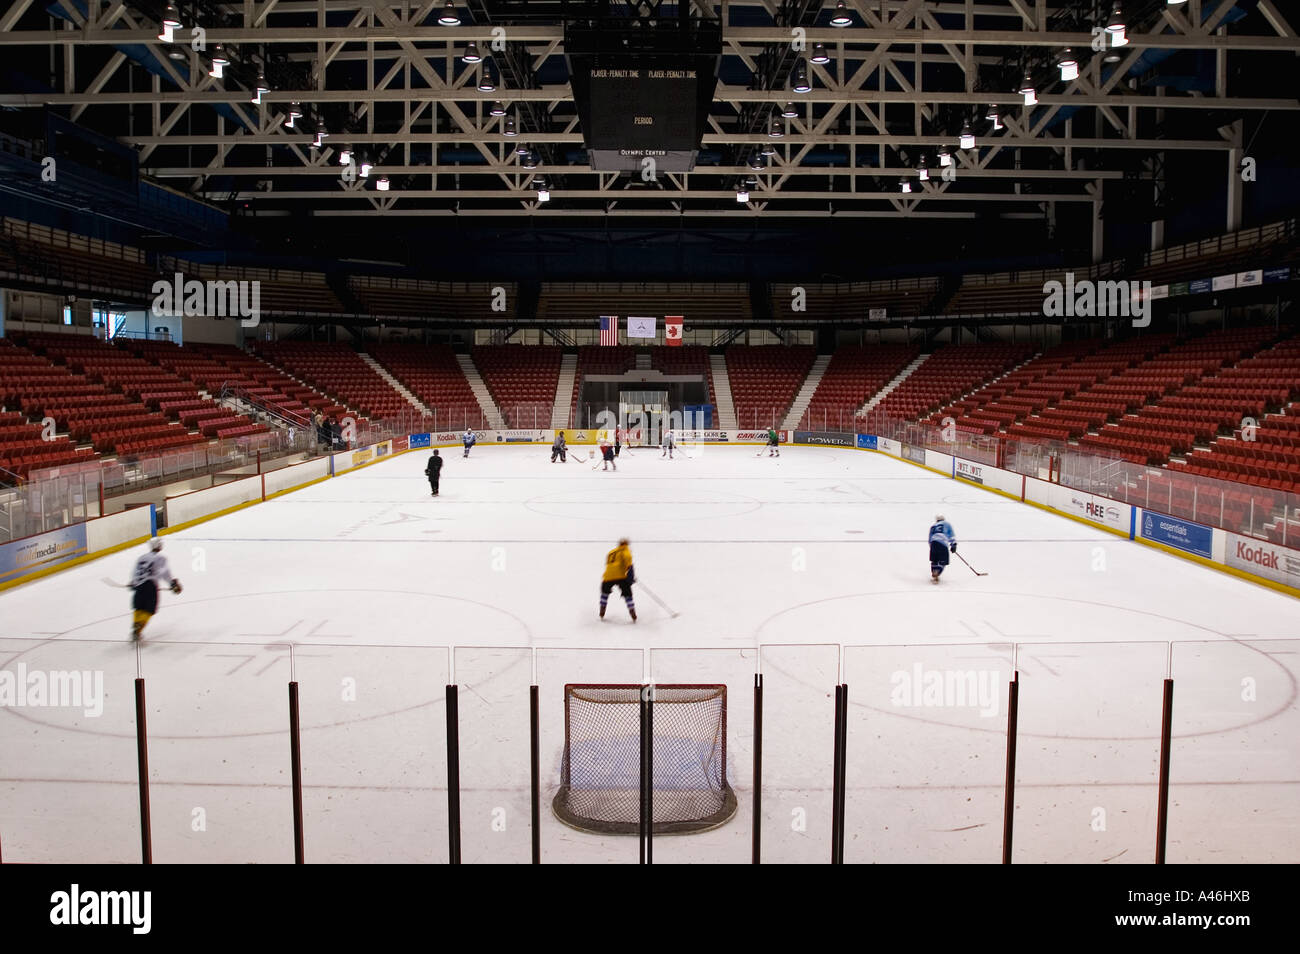 Lake Placid Olympic Center Ice Rink Home Of The 1932 1980 Olympics Lake Placid New York Stock Photo